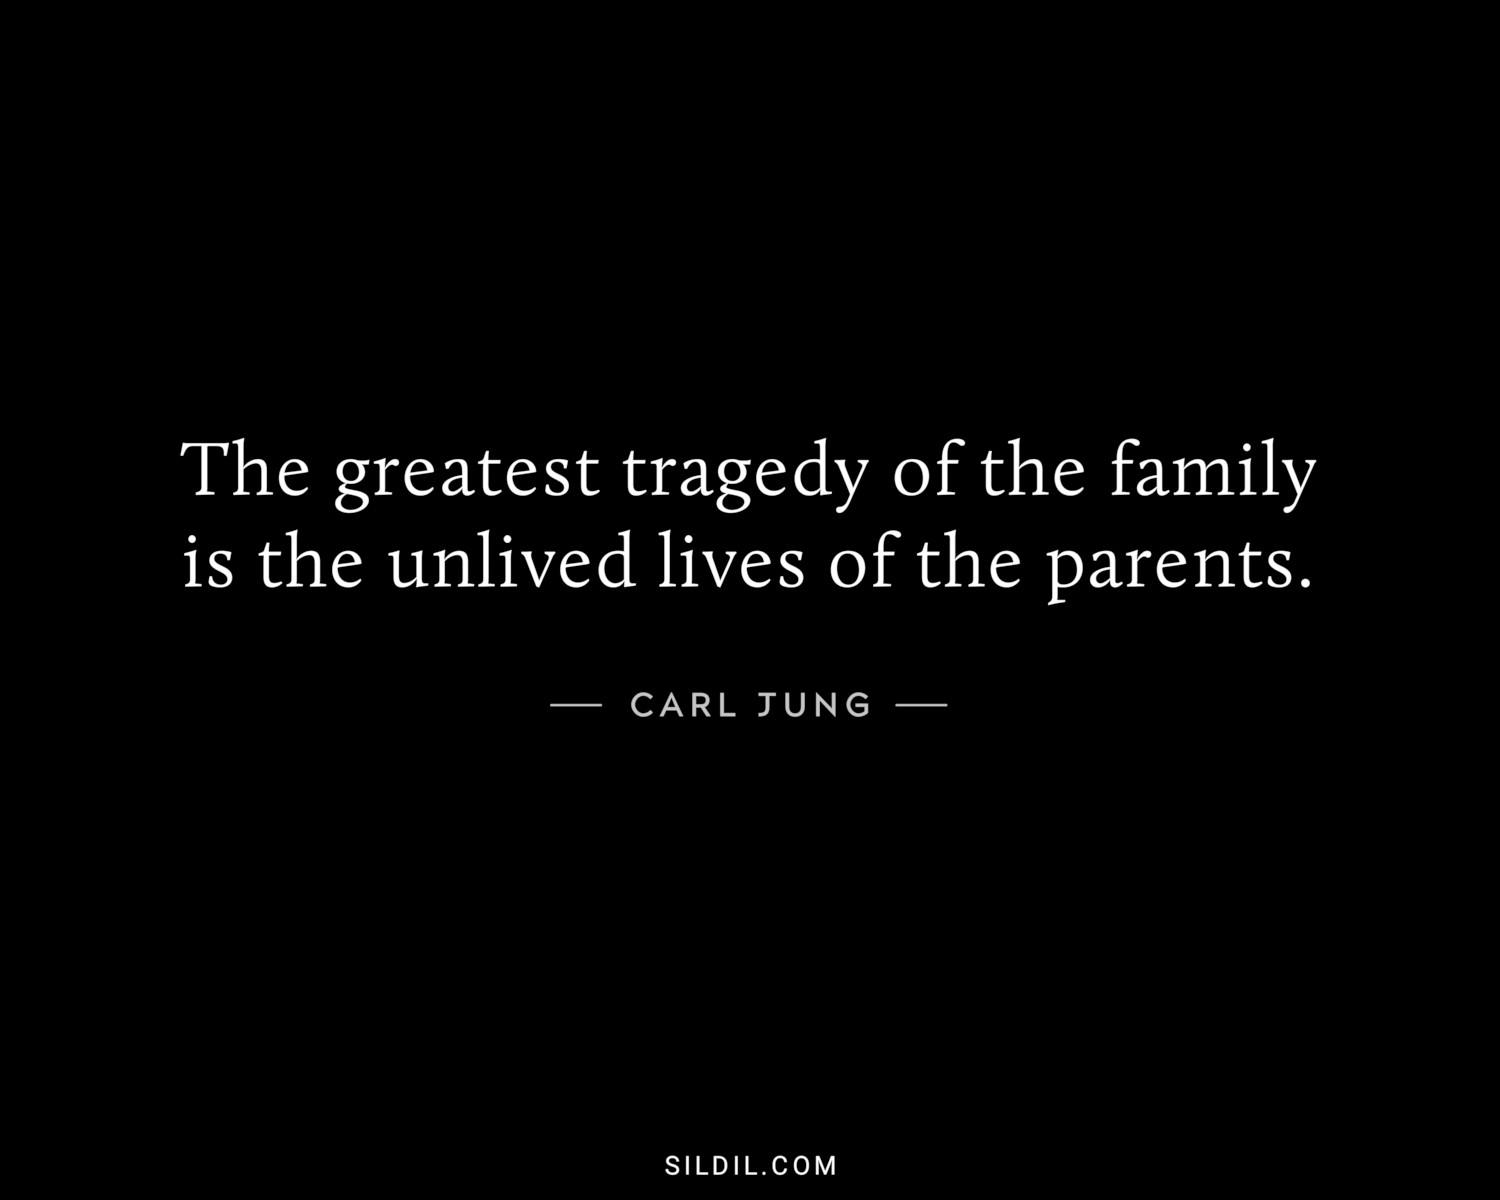 The greatest tragedy of the family is the unlived lives of the parents.